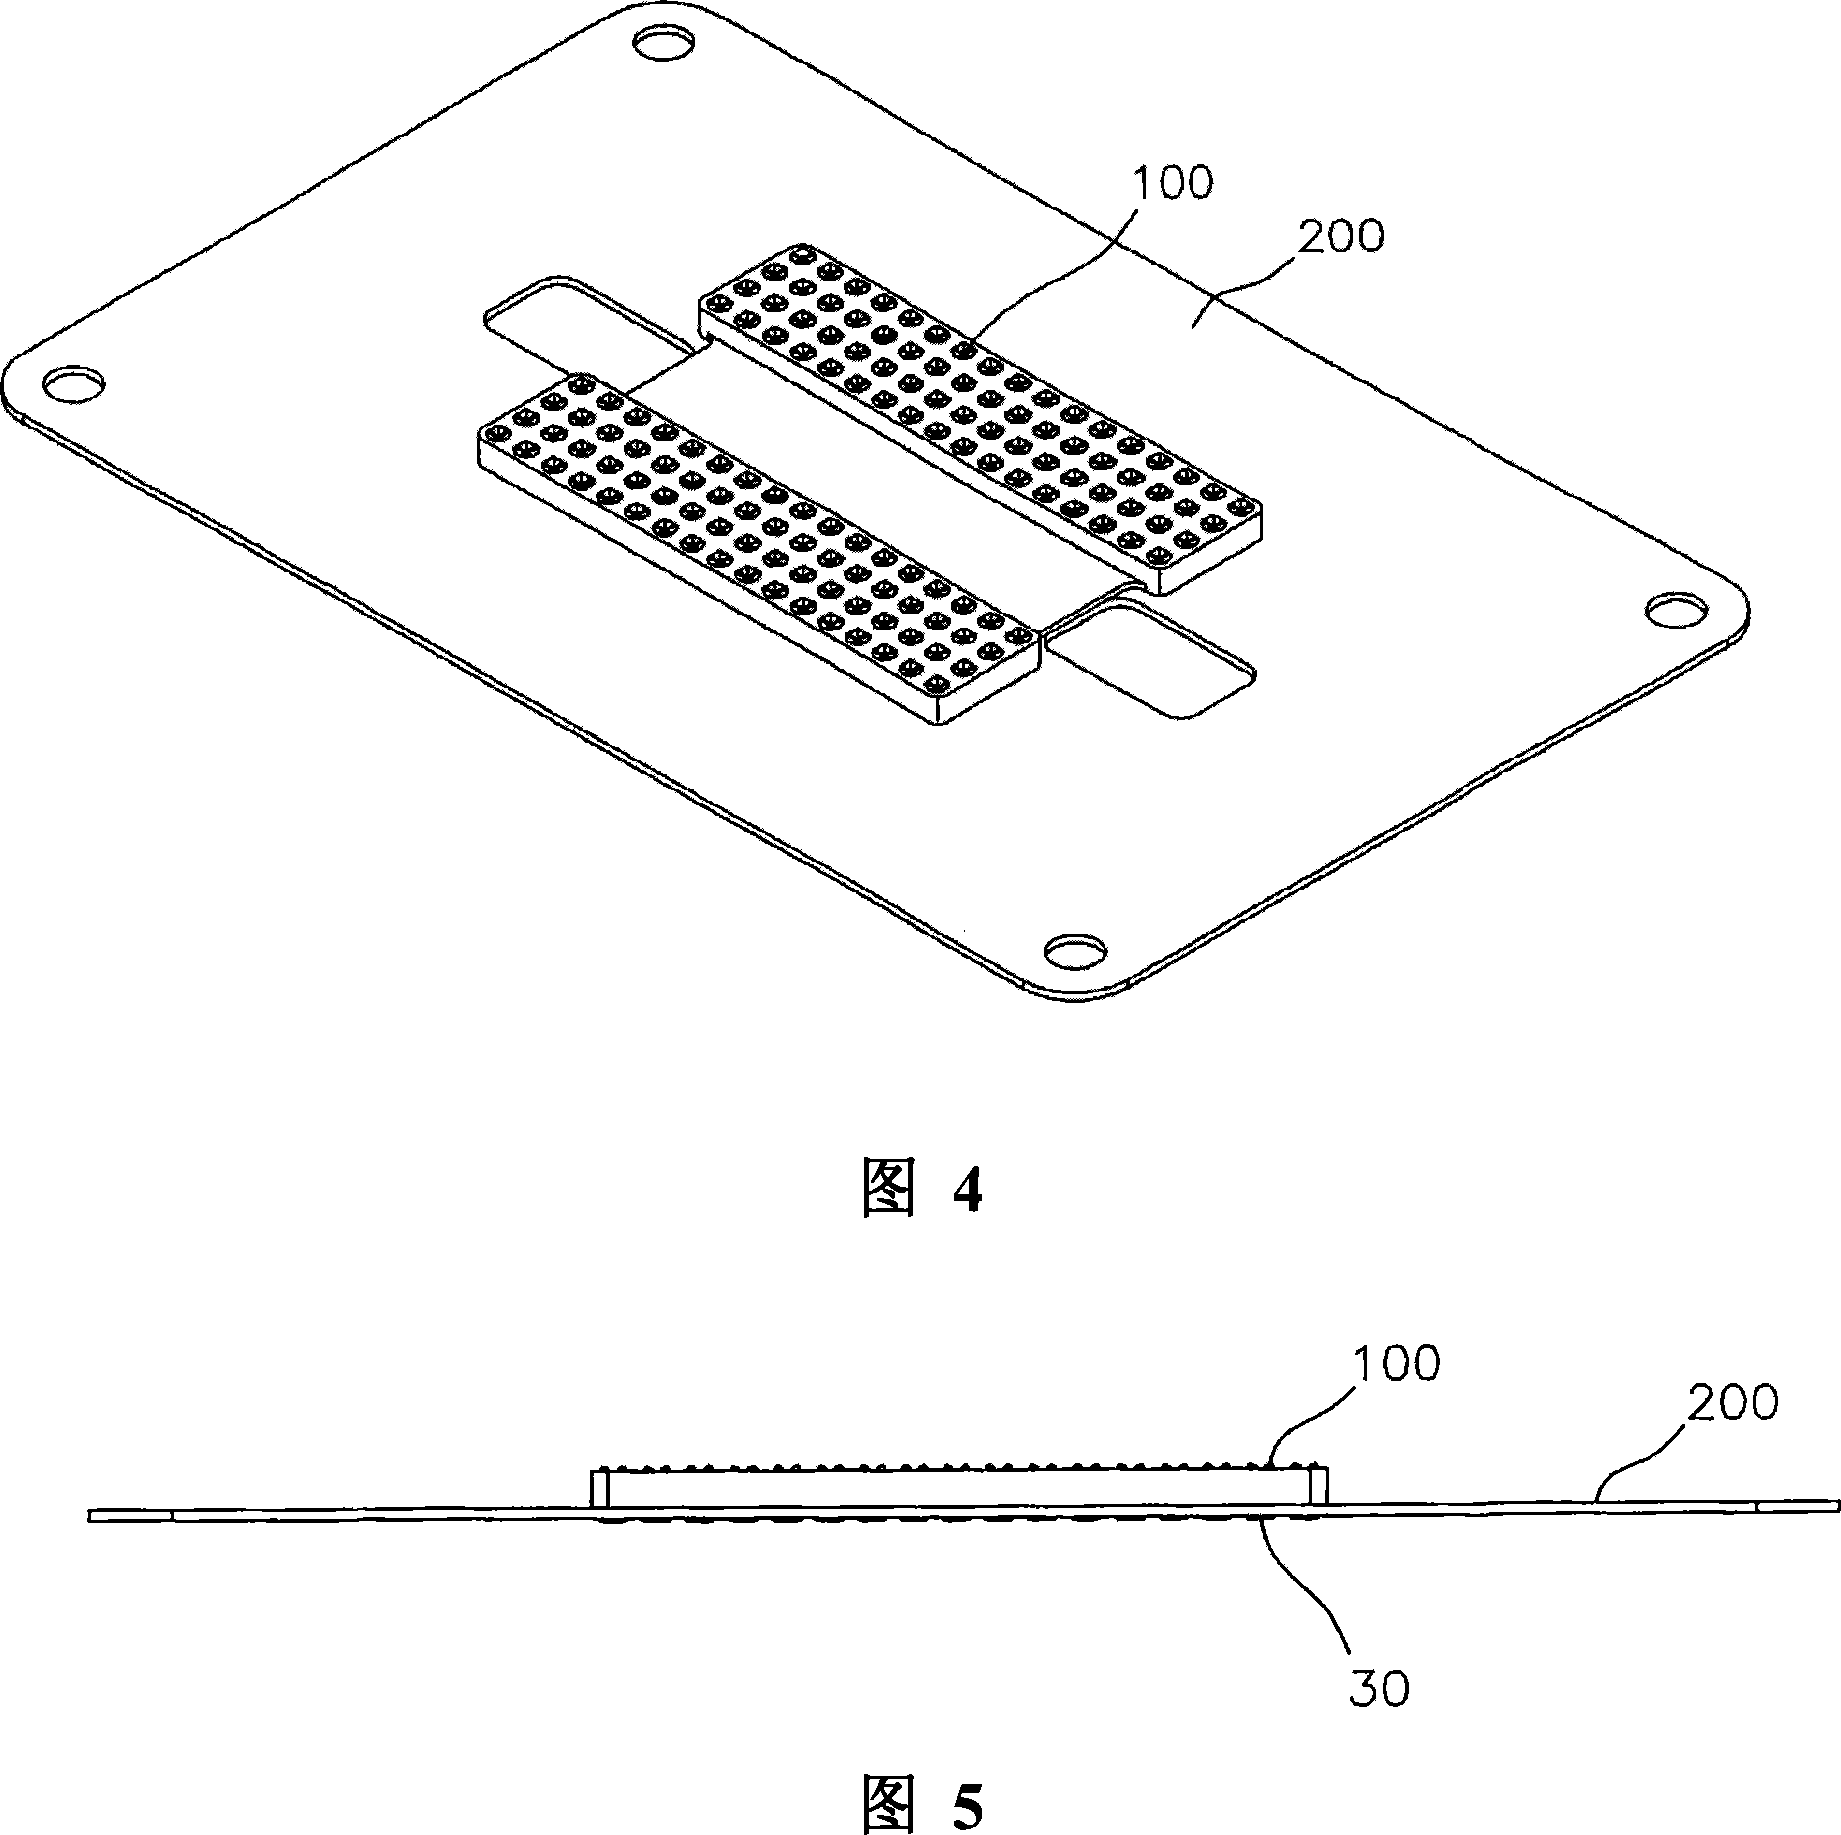 Contact probe and socket for testing semiconductor chips